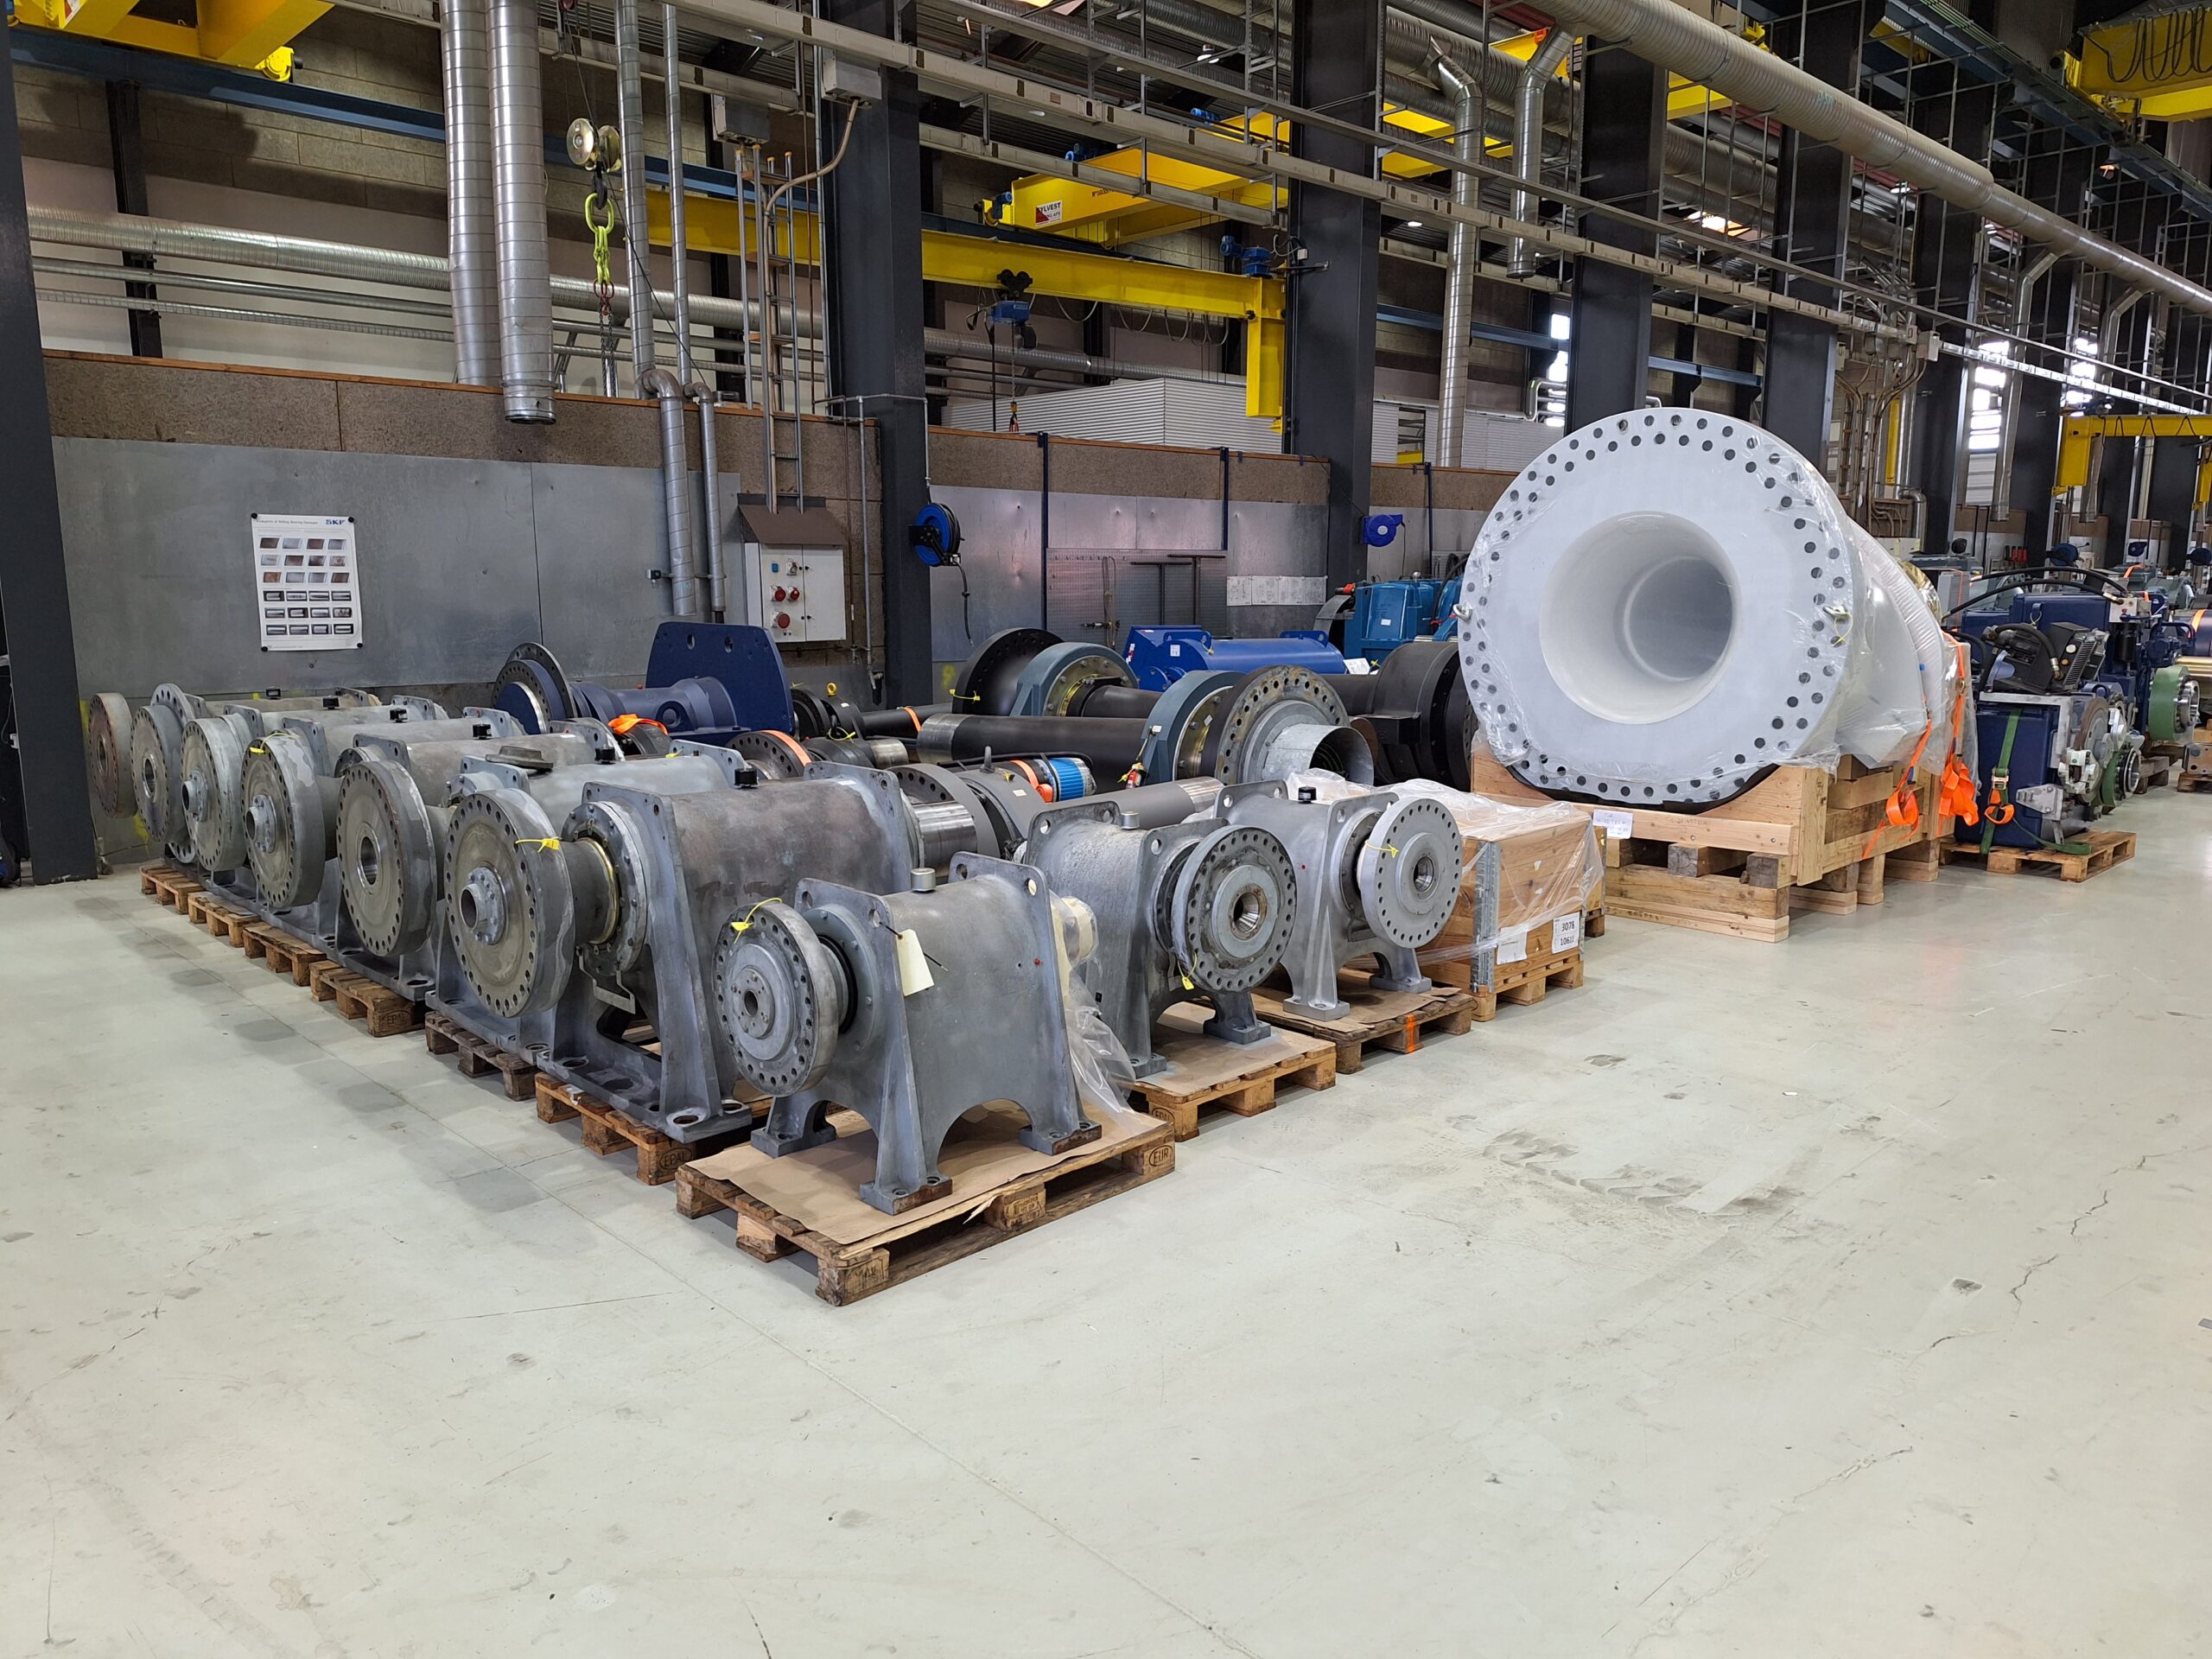 Sideways view of a selection of refubished and repaired wind turbine components.